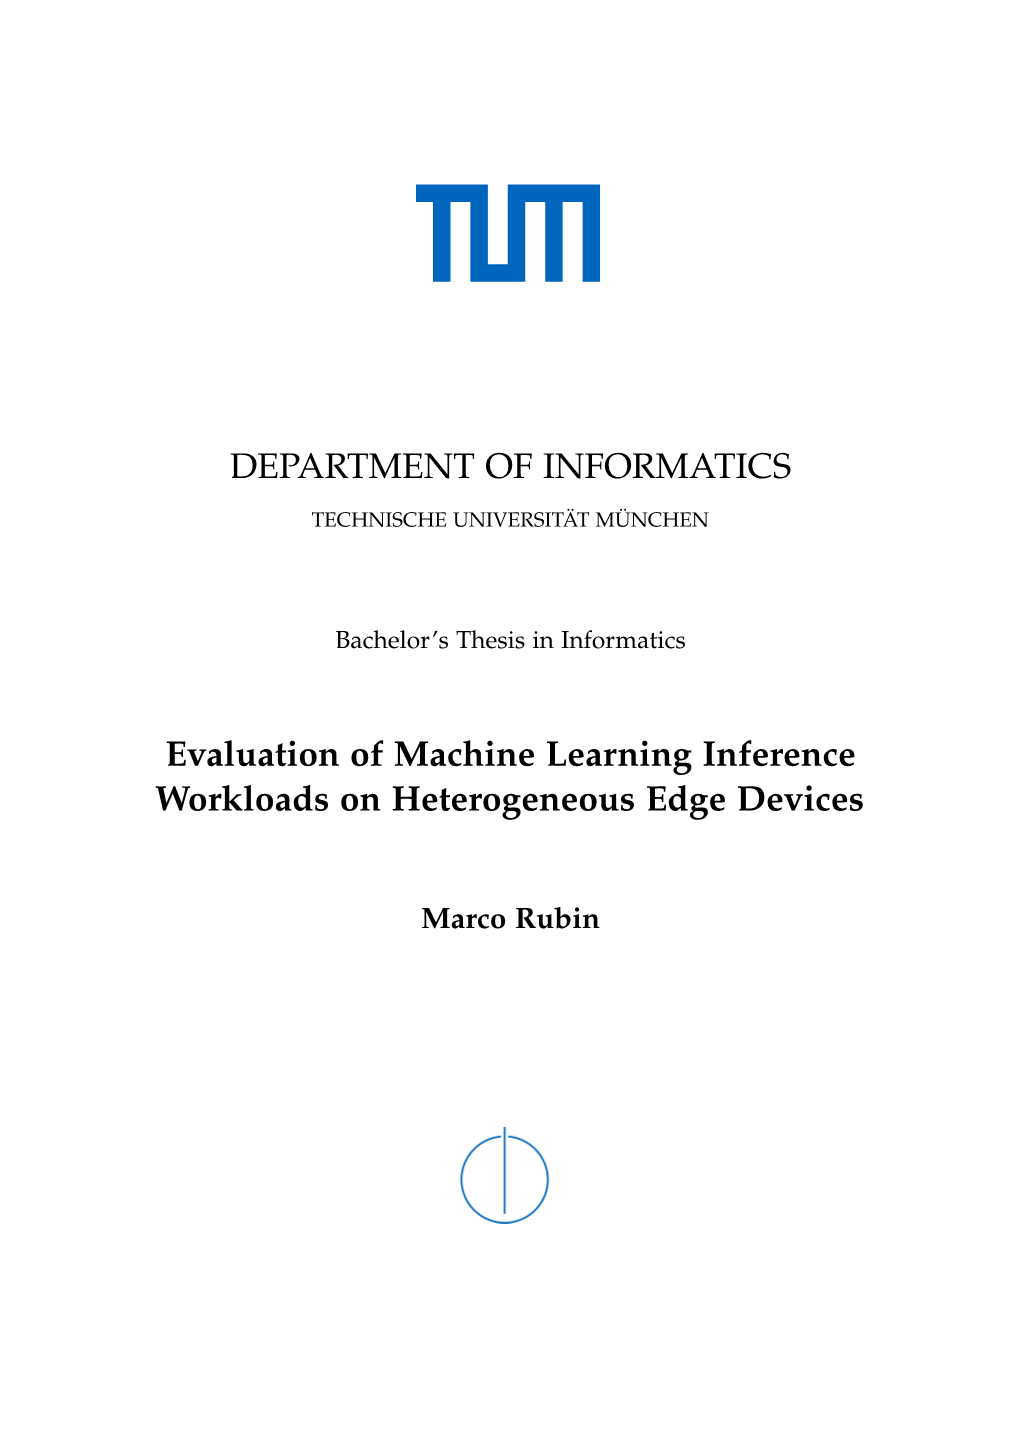 DEPARTMENT of INFORMATICS Evaluation of Machine Learning